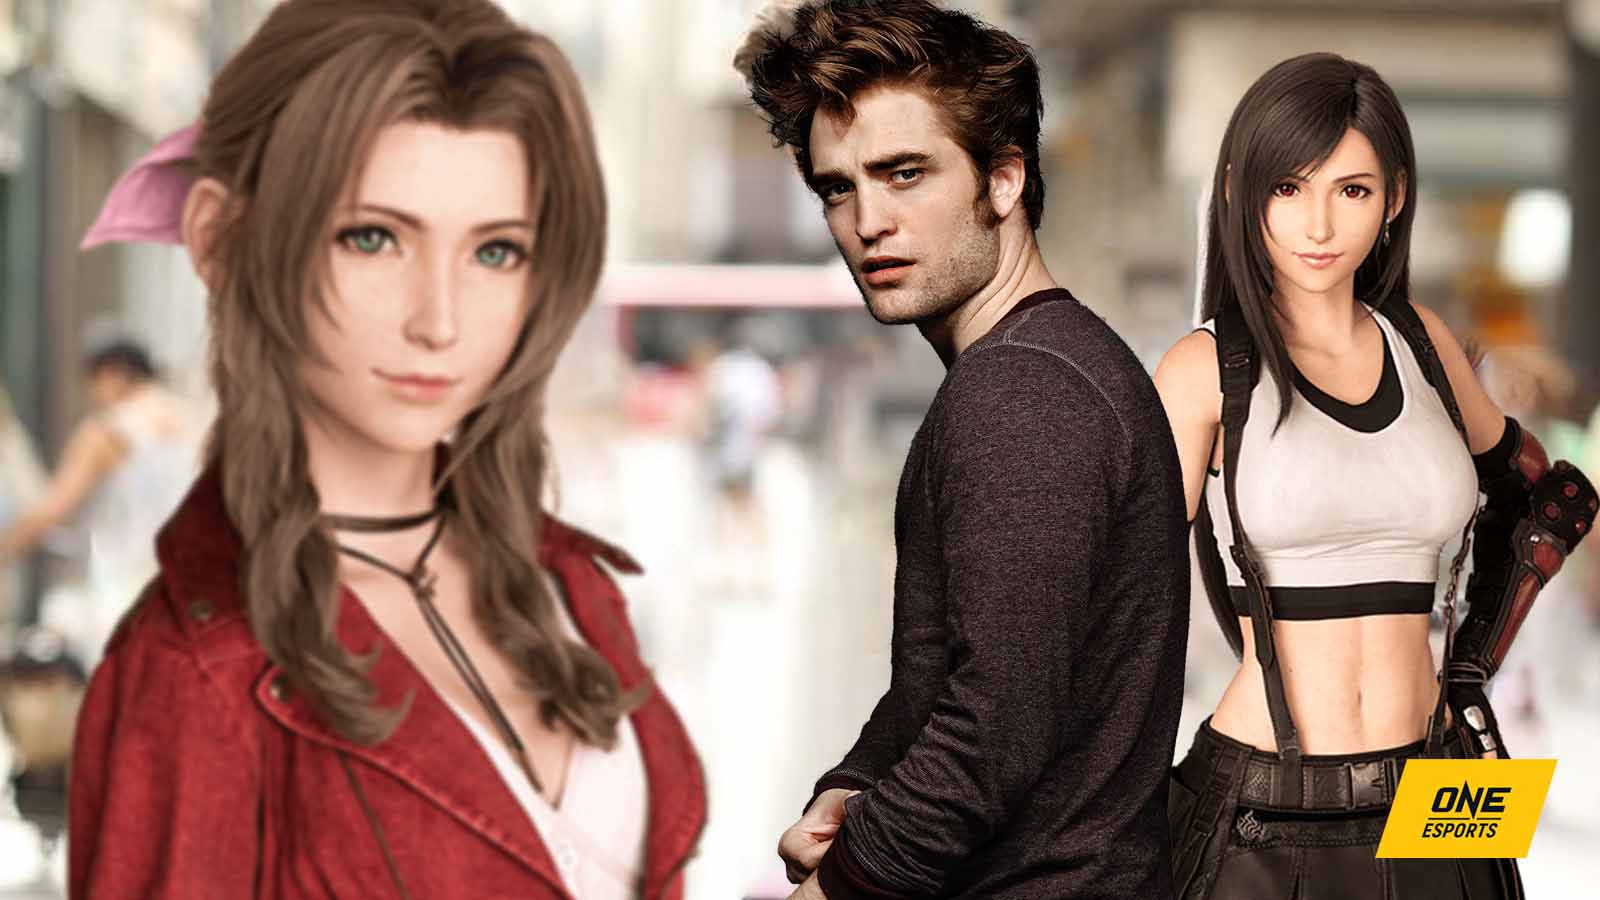 Gamer at heart? Robert Pattinson learned about love through Final Fantasy  VII | ONE Esports